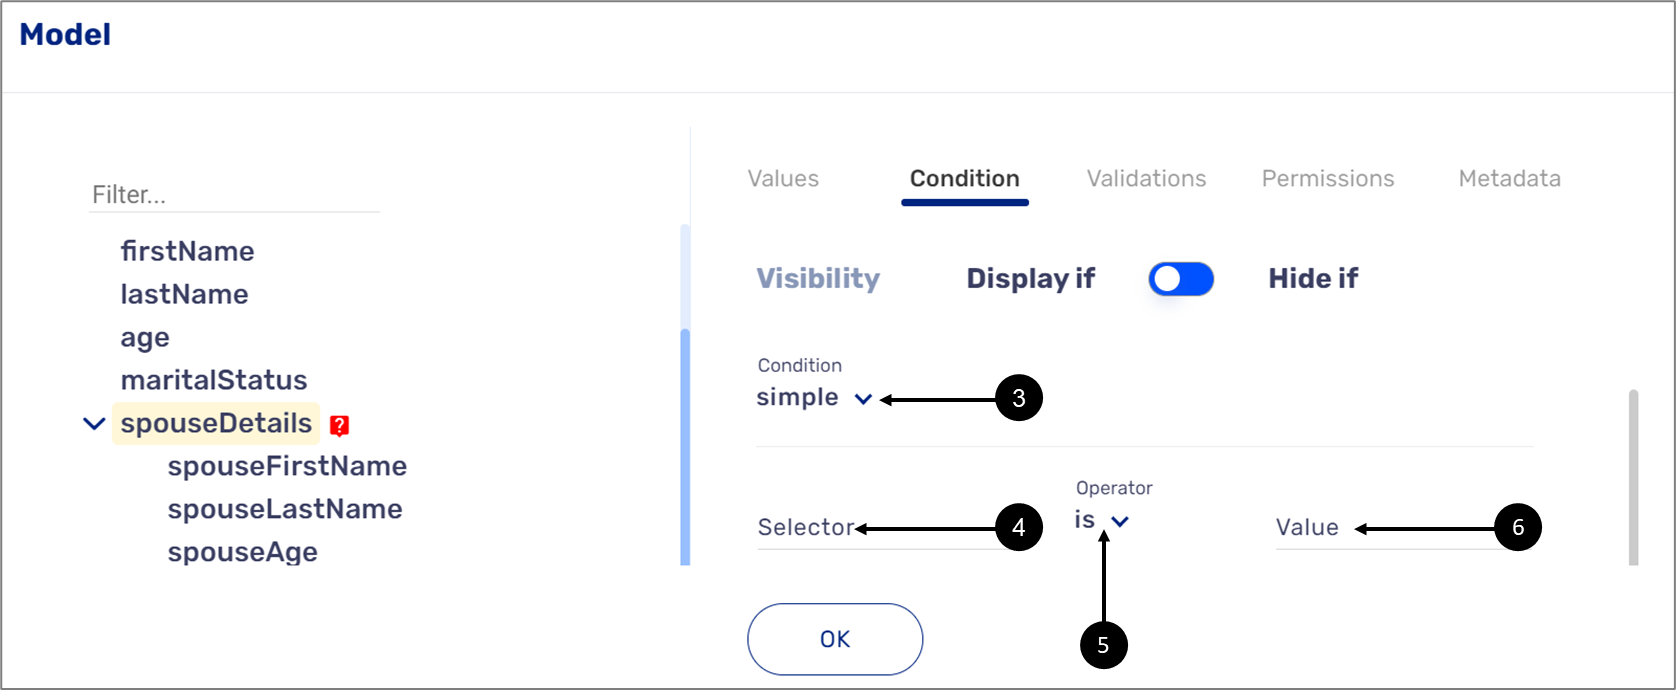 The type of the condition is set to no by default. When changing it to simple, the logical expression parameters - Selector, Operator and Value appear. In addition, the icon will appear next to the transaction data item that is implemented with the condition.